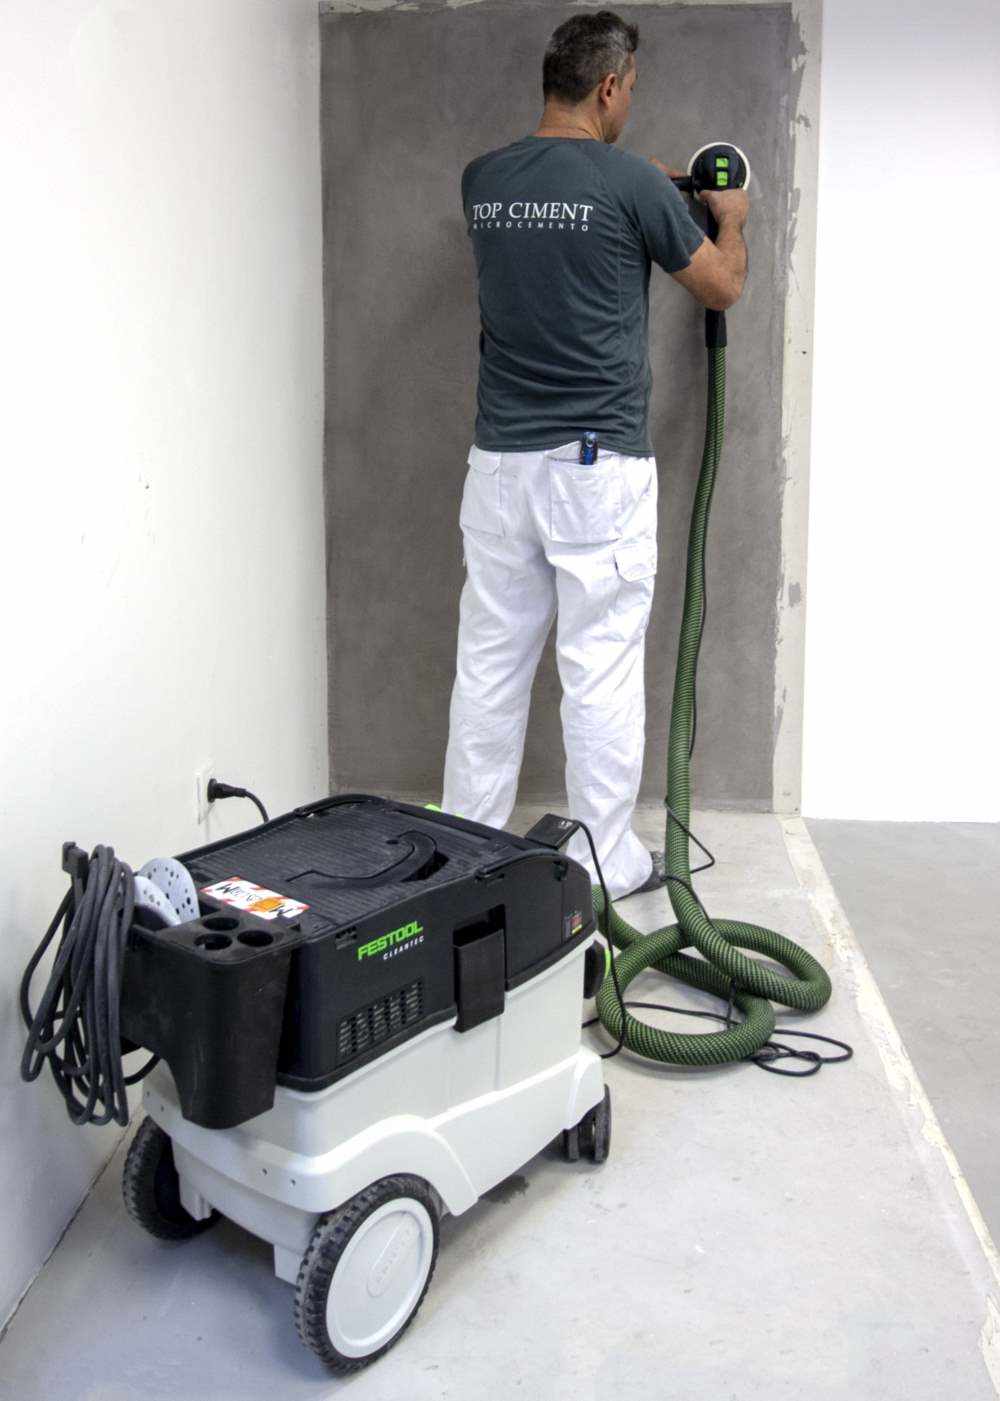 Festool's CLEANTEC mobile systems ideal for microcement